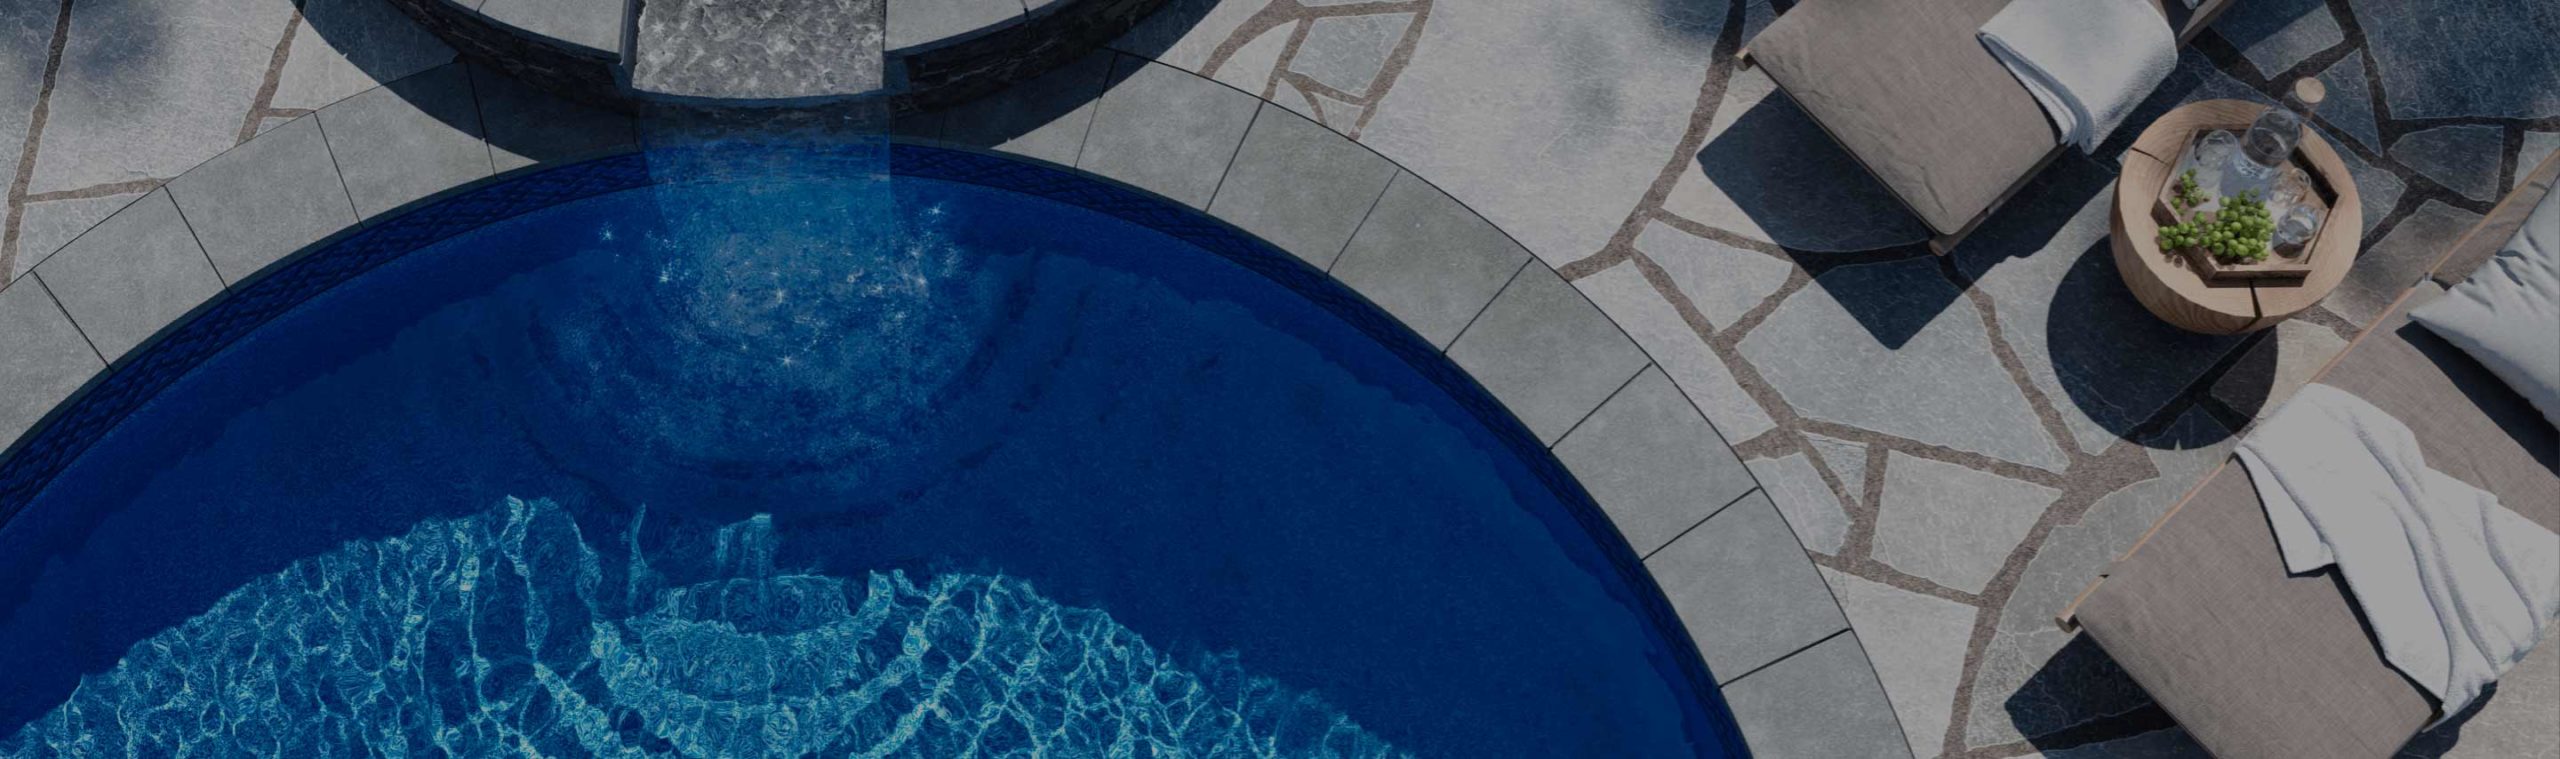 The Benefits of a Latham Vinyl Liner Pool